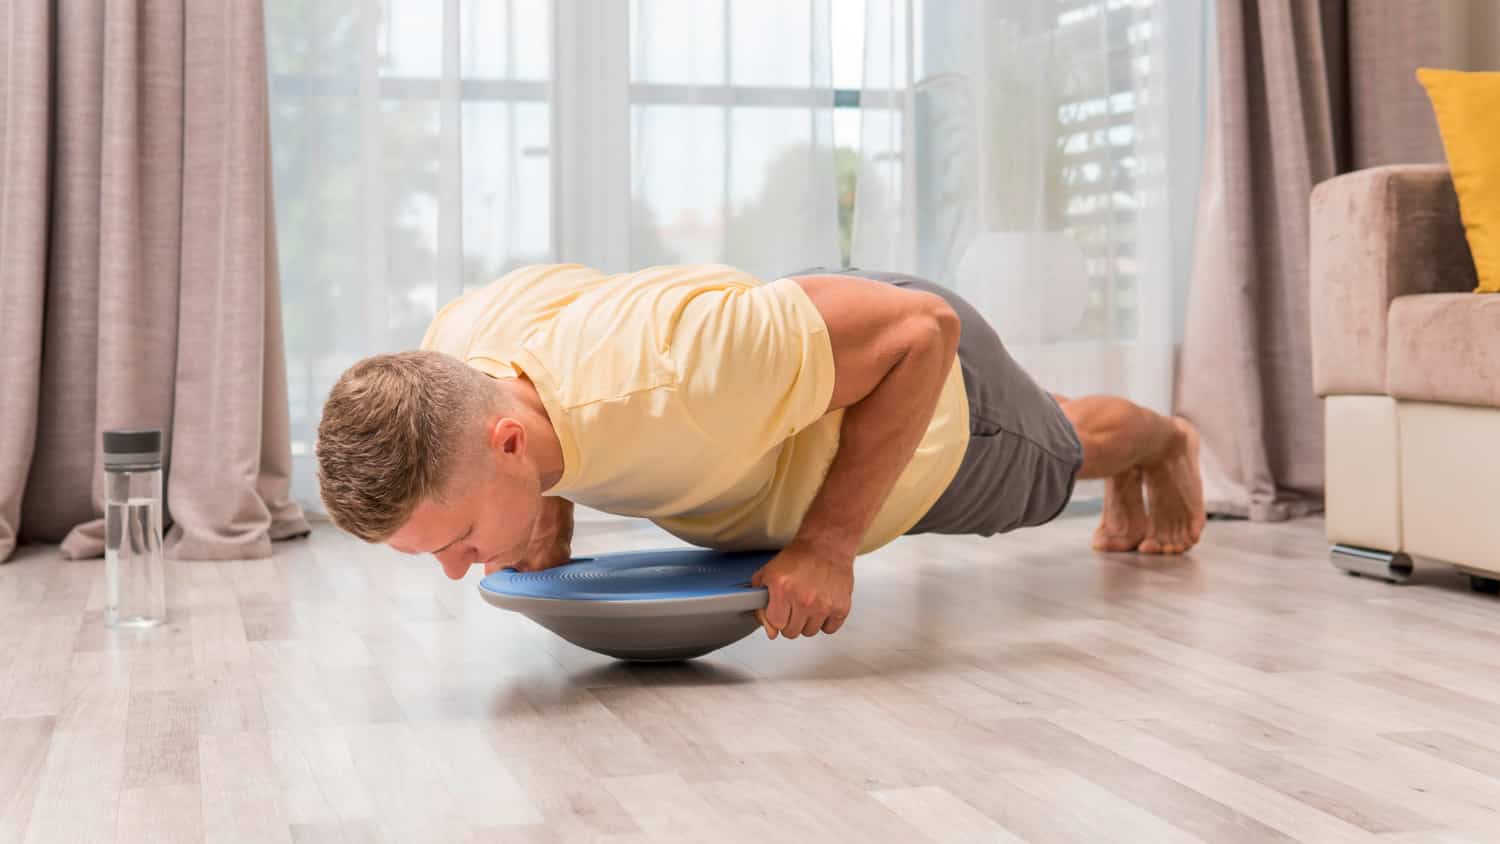 10 Best Gym Exercises That You Can Do With A Bosu Ball